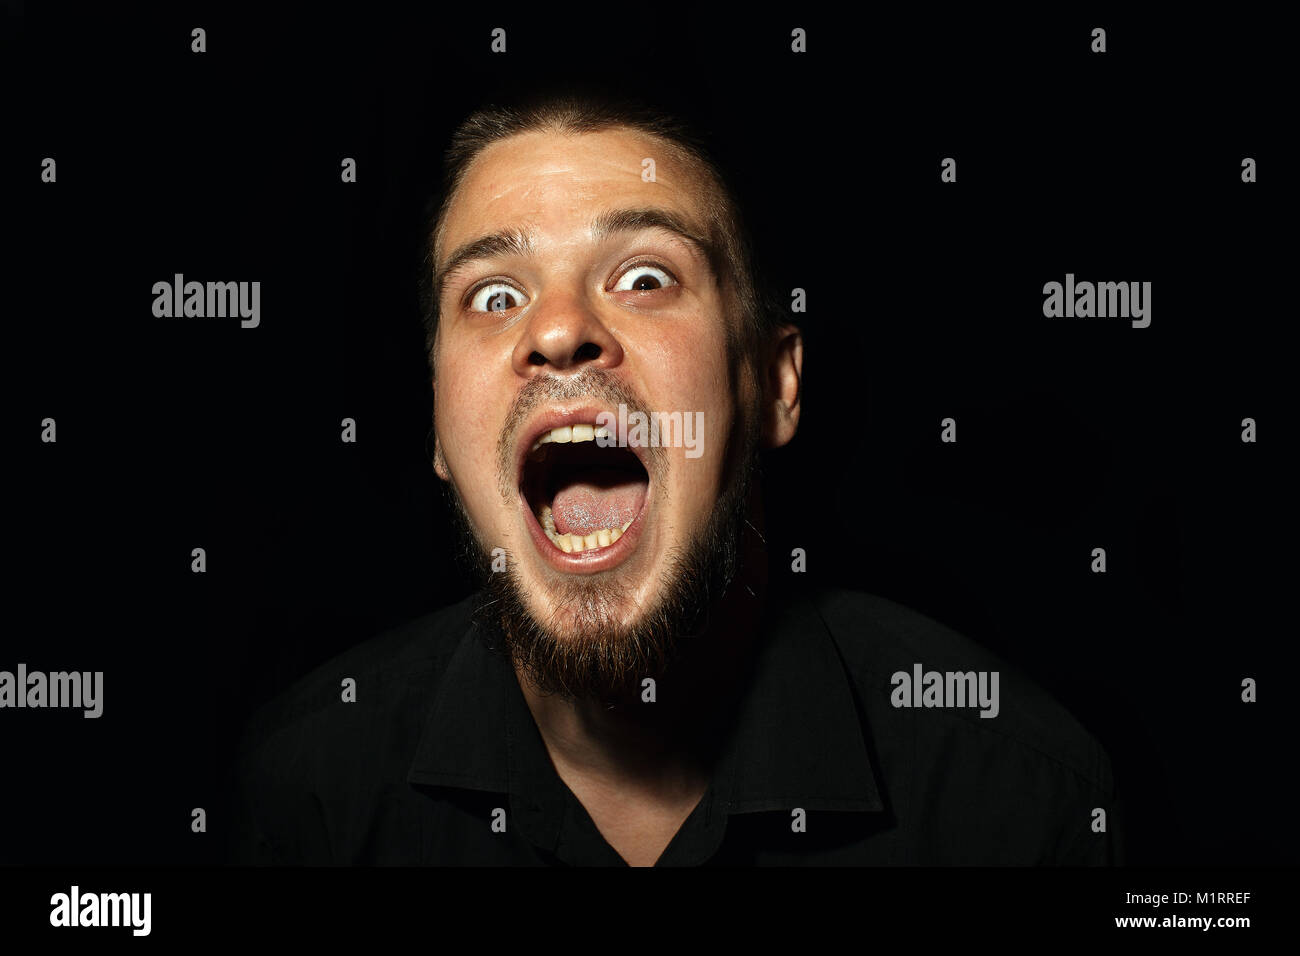 Scared face of spooky man in the dark. The man is yelling Stock Photo